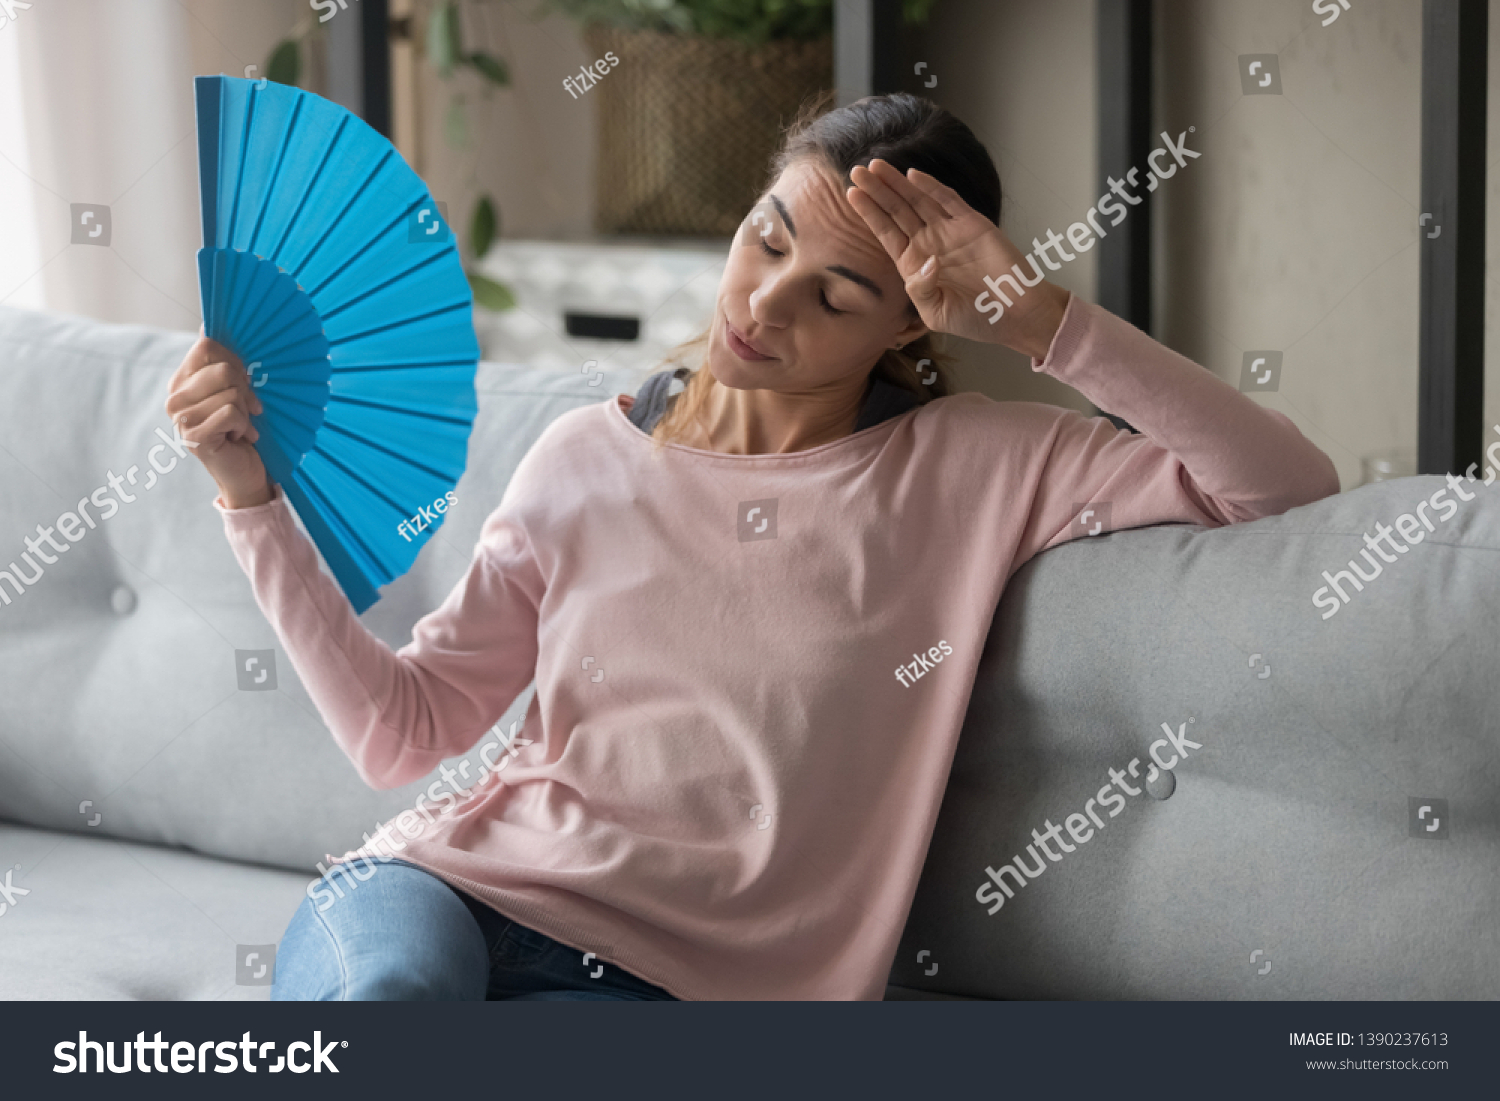 Overheated female sitting on couch in living room at hot summer weather day feeling discomfort suffers from heat waving blue fan to cool herself, girl sweating dwelling without air conditioner concept #1390237613